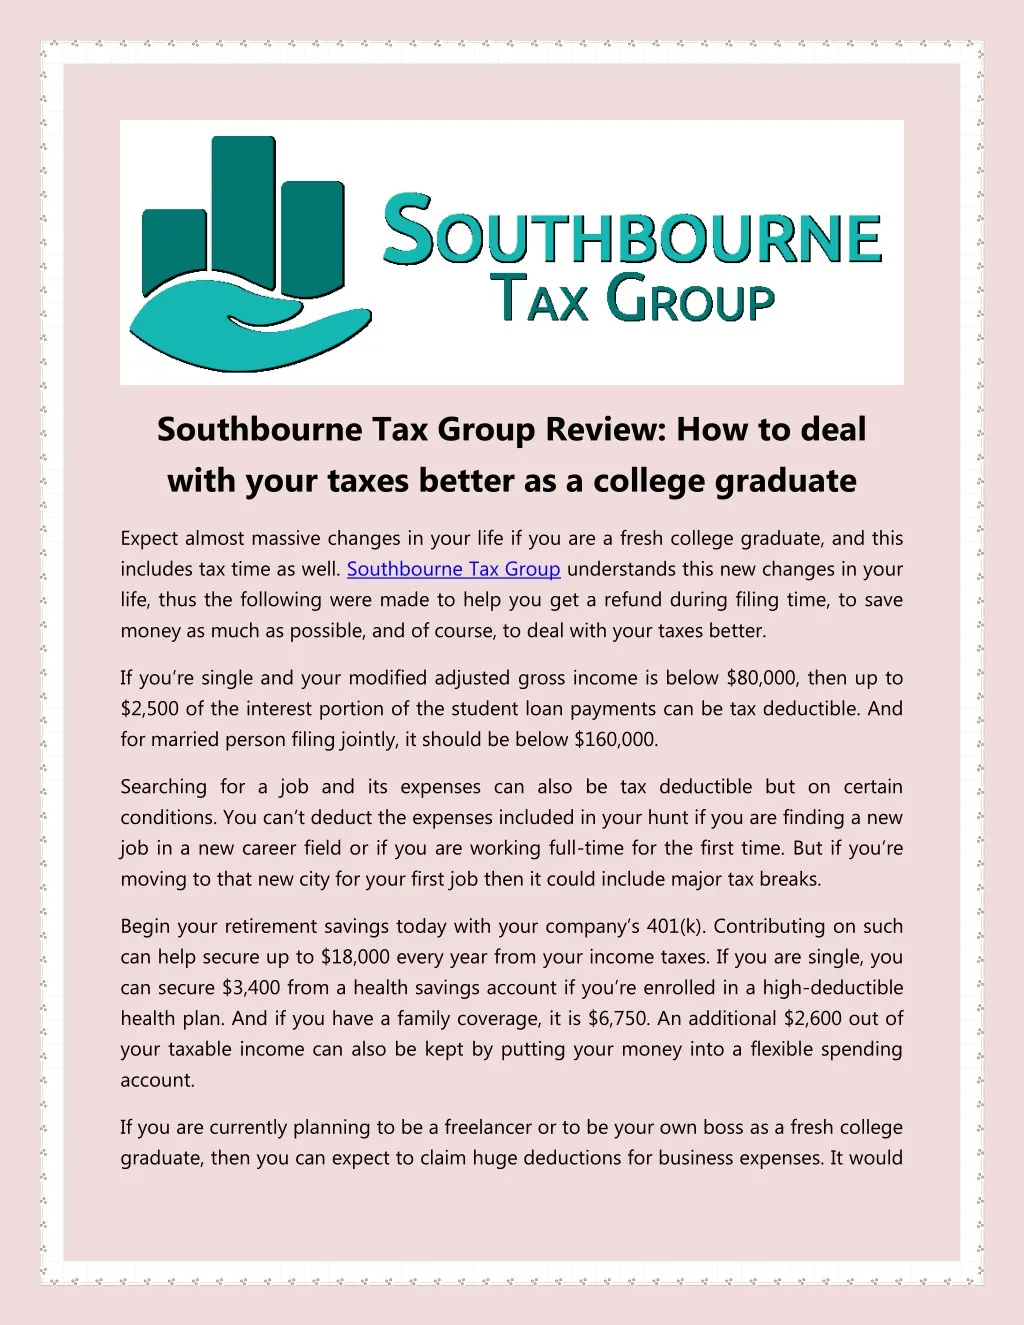 southbourne tax group review how to deal with